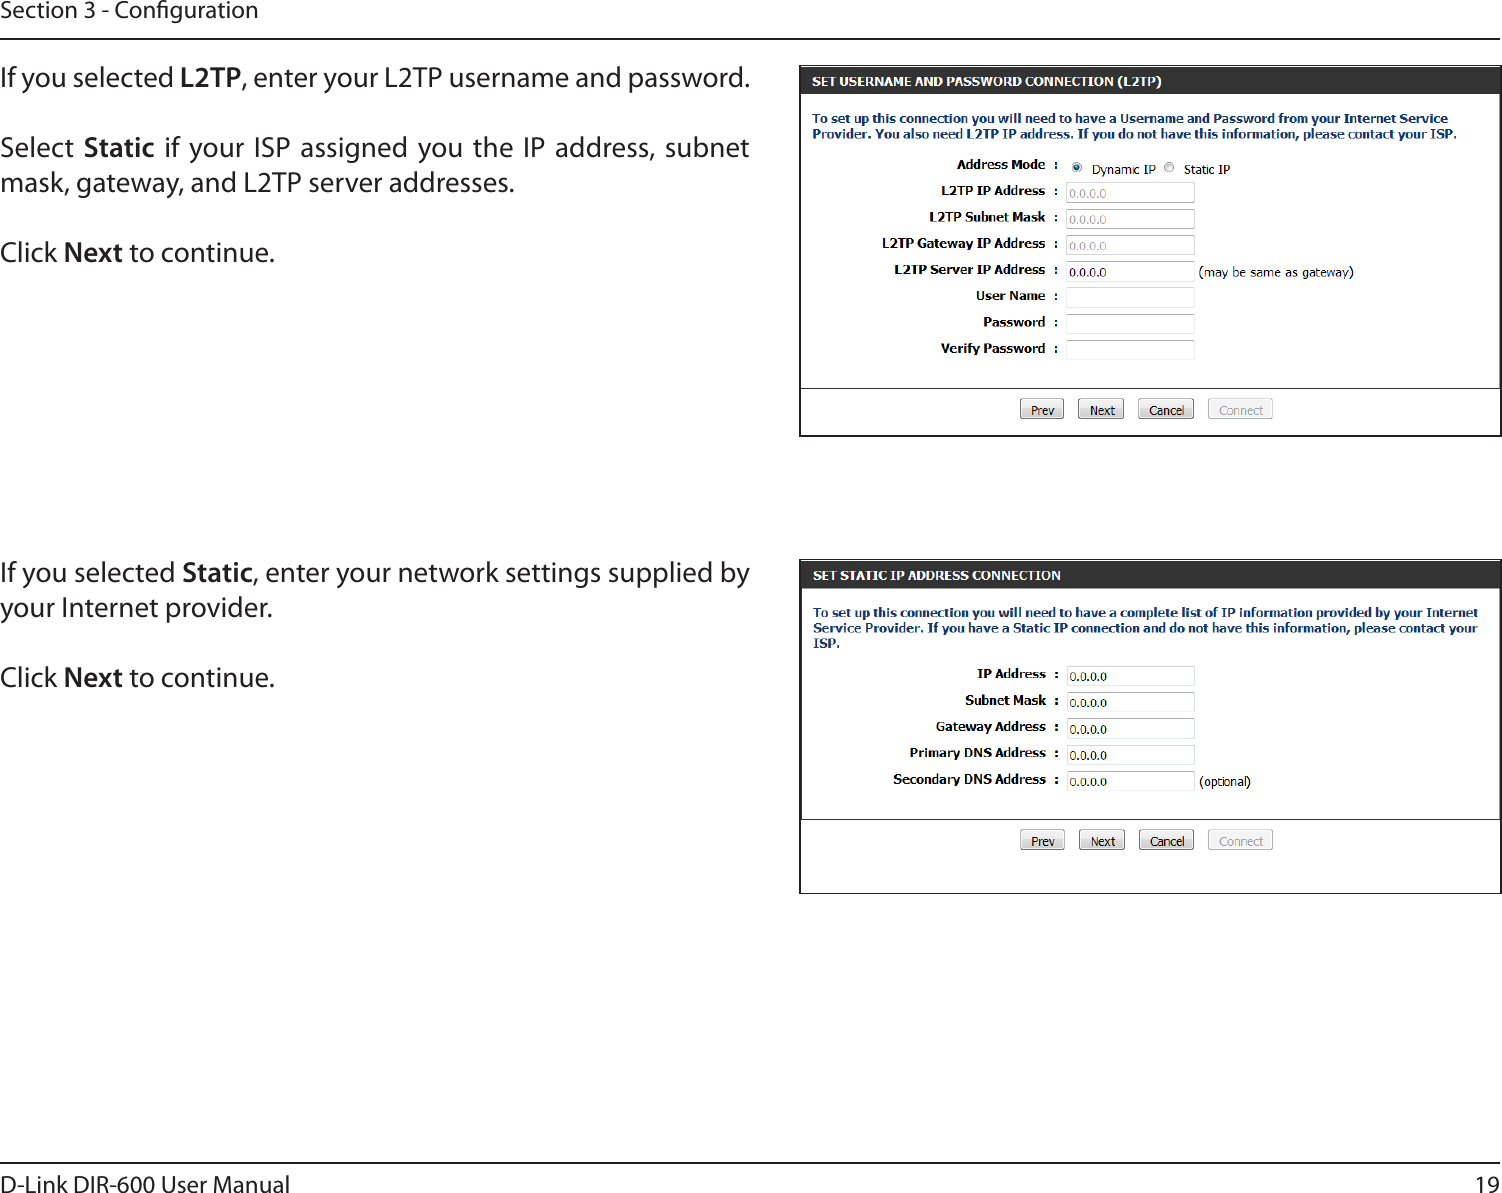 19D-Link DIR-600 User ManualSection 3 - CongurationIf you selected L2TP, enter your L2TP username and password. Select Static if  your ISP  assigned you the  IP address, subnet mask, gateway, and L2TP server addresses.Click Next to continue.If you selected Static, enter your network settings supplied by your Internet provider. Click Next to continue.